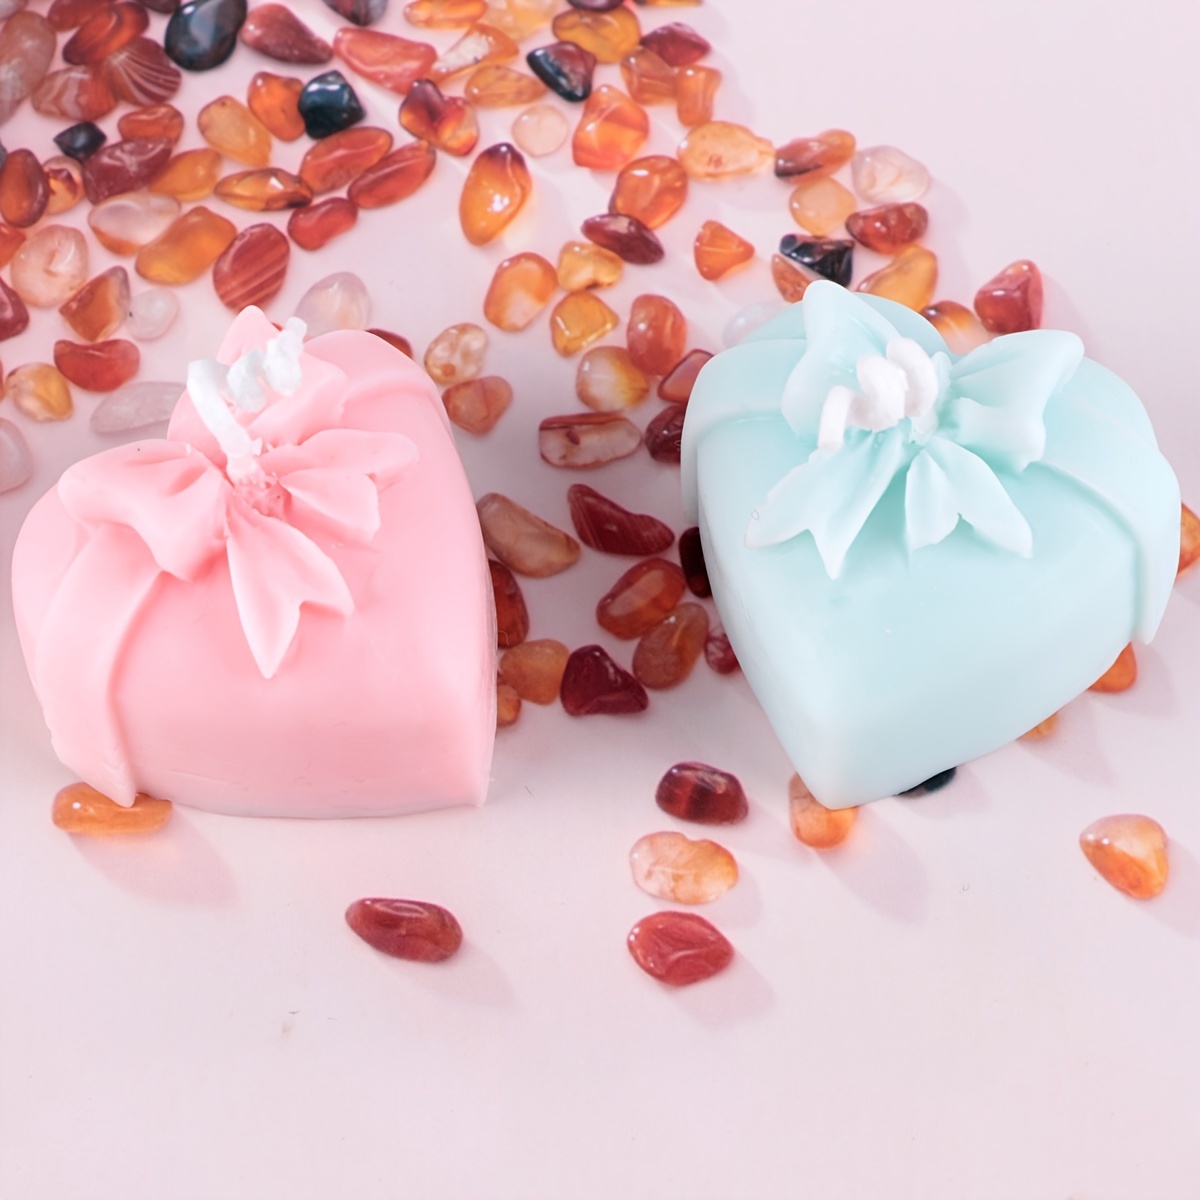 1pc 3d Braided Heart Shaped Silicone Mold For Cake, Chocolate, Aromatherapy  Wax, Gypsum, Candle, Ice, Diy Home Decoration, Valentine'S Day, Mother'S  Day, Spring Festival, Wedding Gifts, Decoration